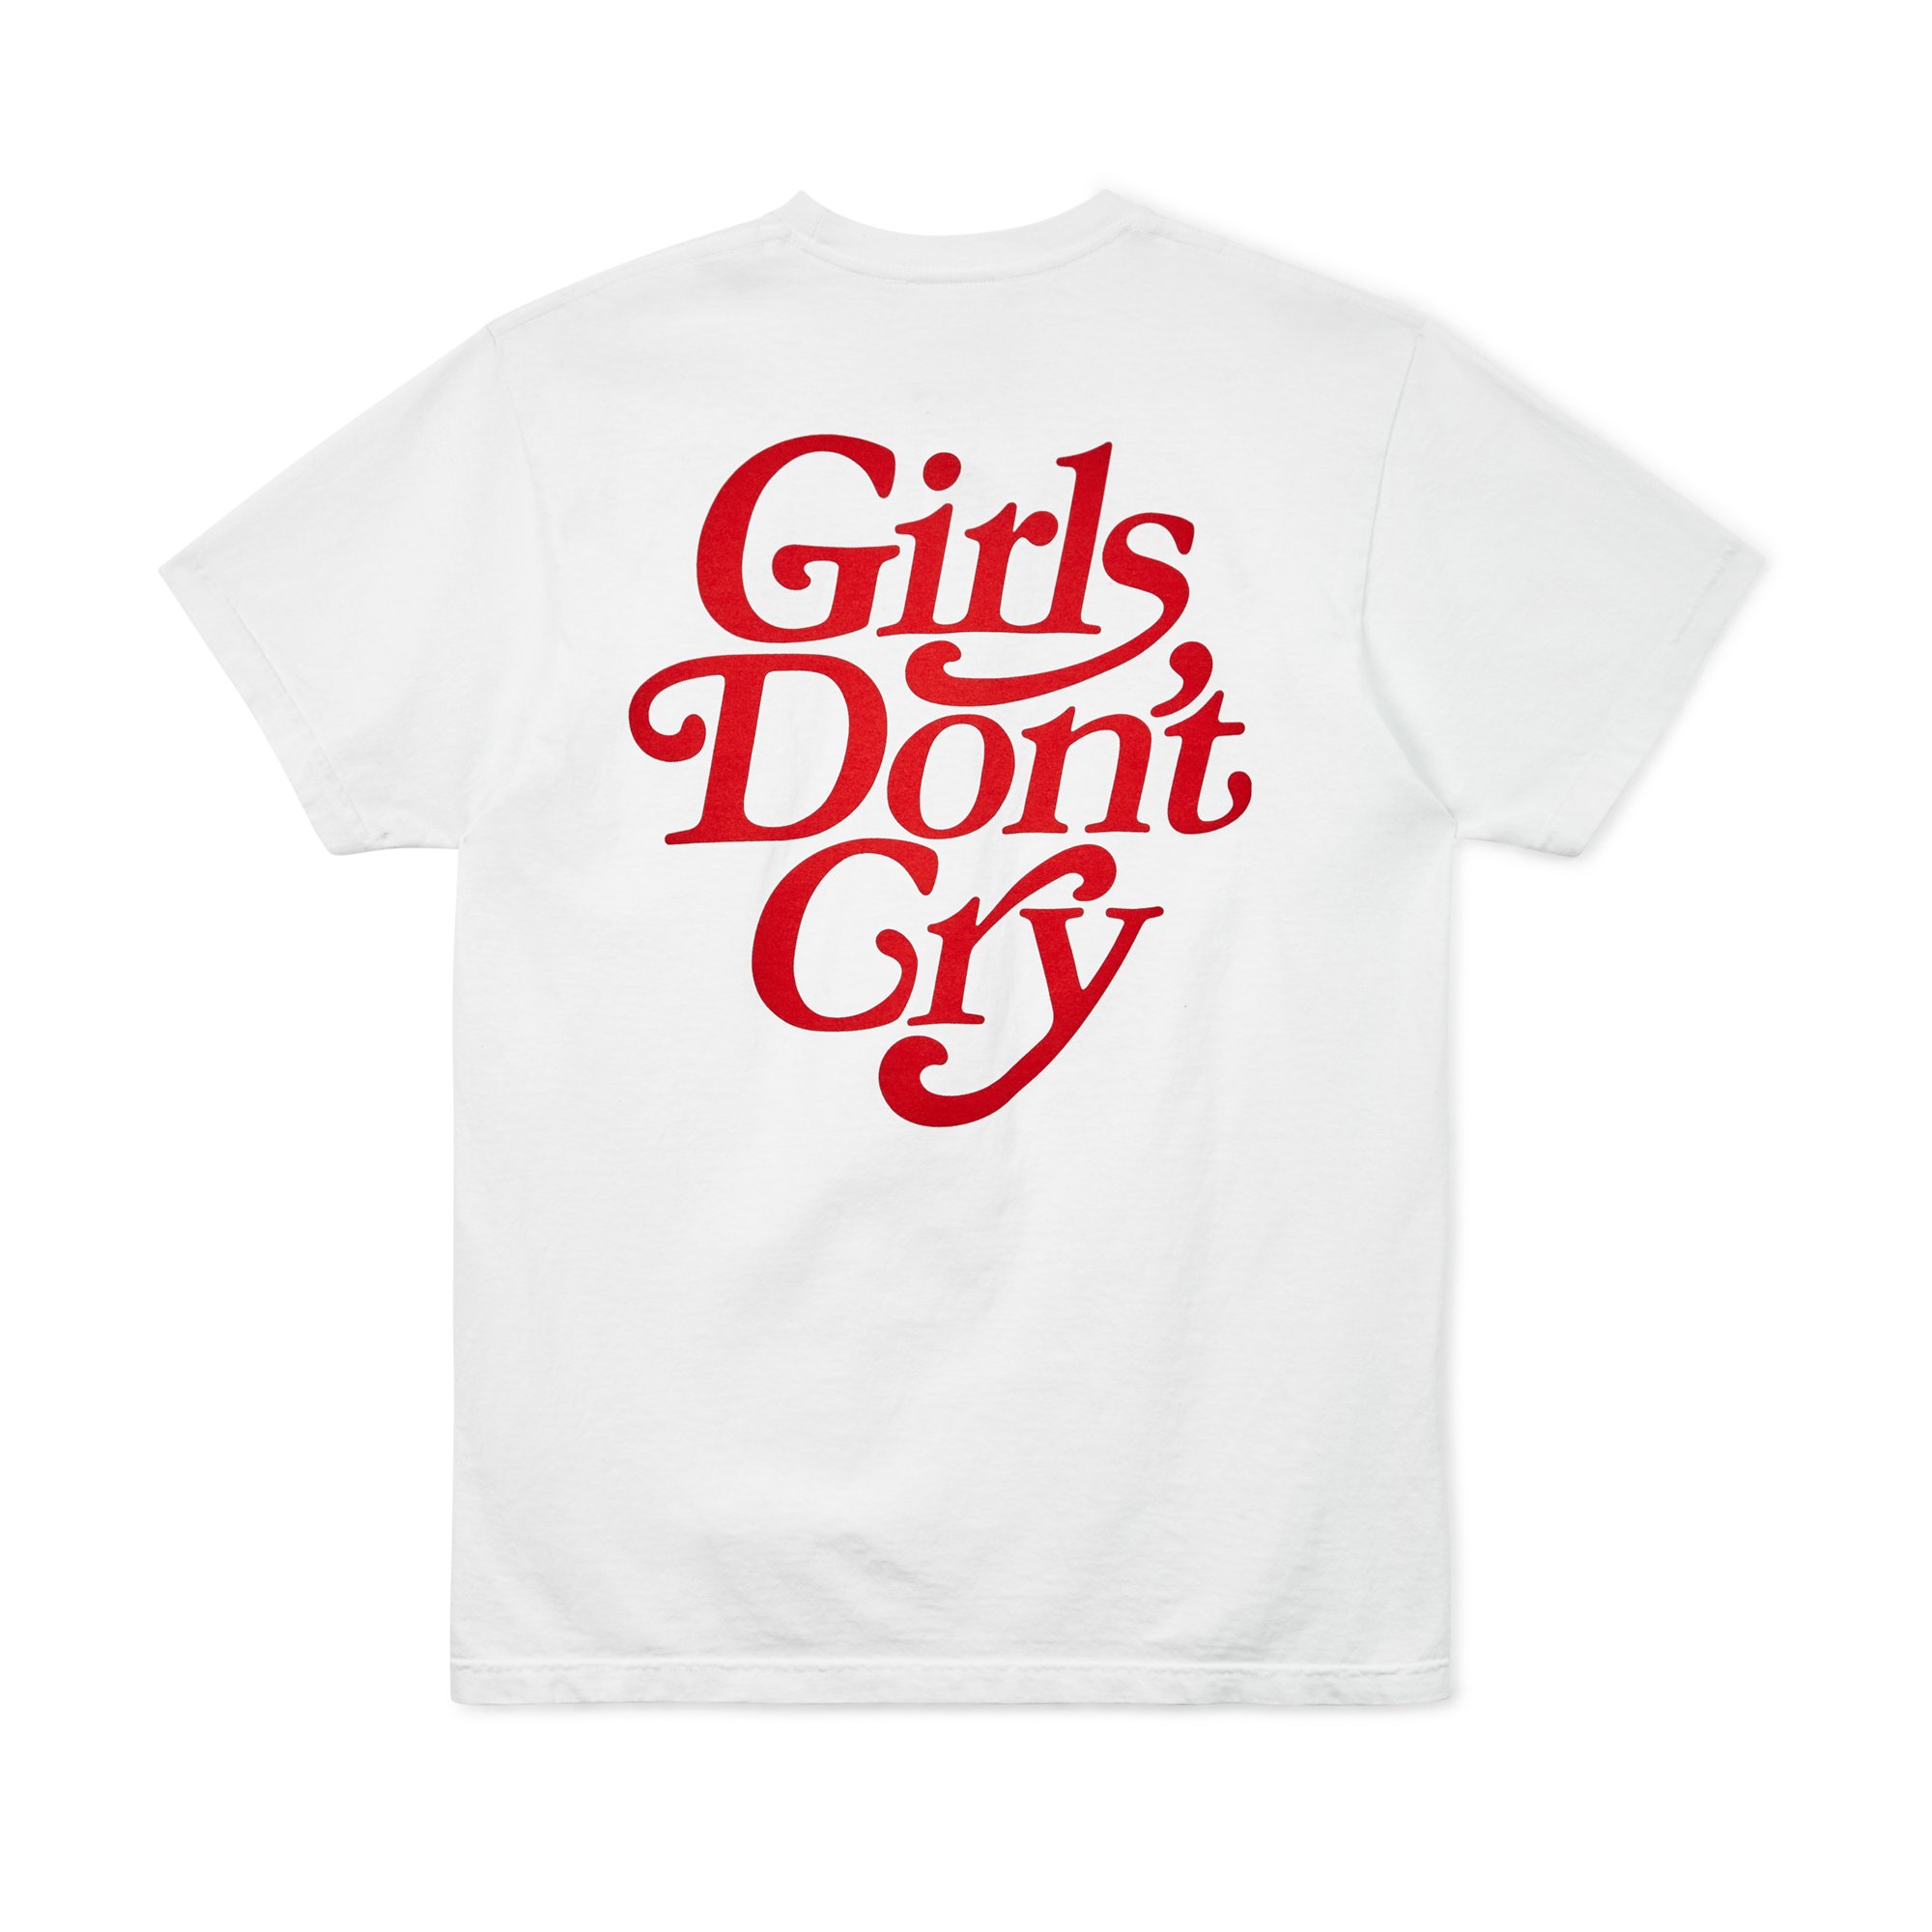 Other Brands Girls Don't Cry - Buy & Sell Streetwear